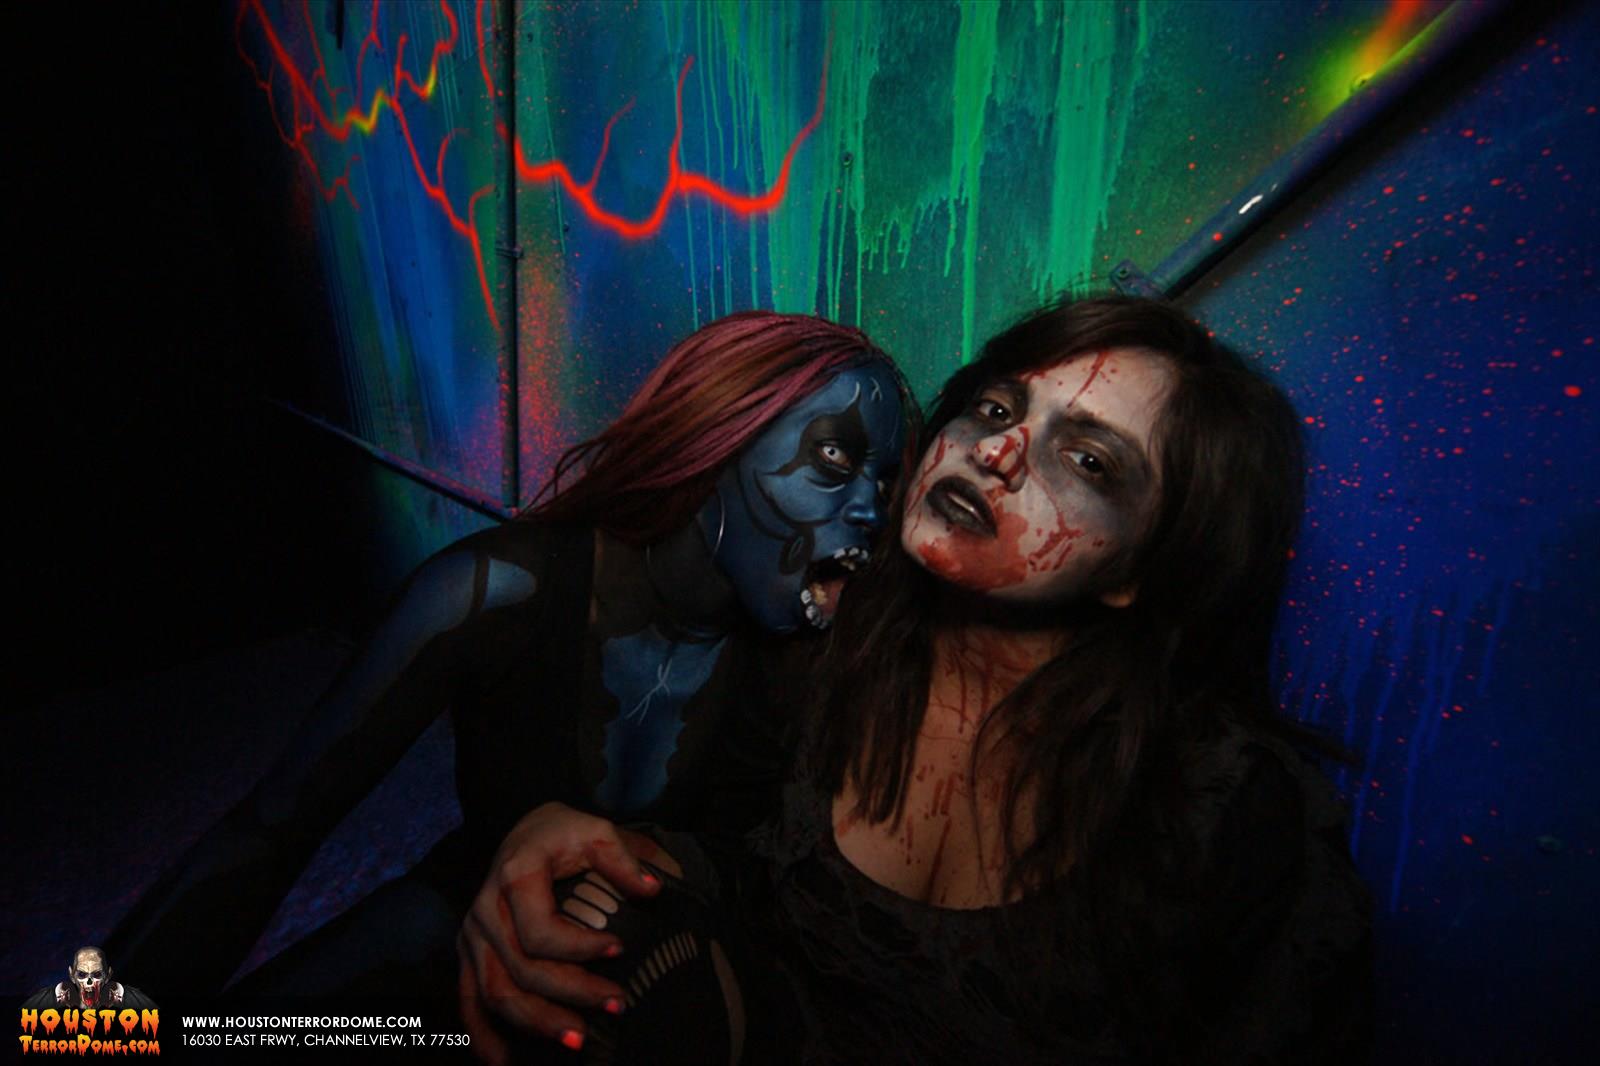 Haunted House Photos from Saturday 10-27-2012